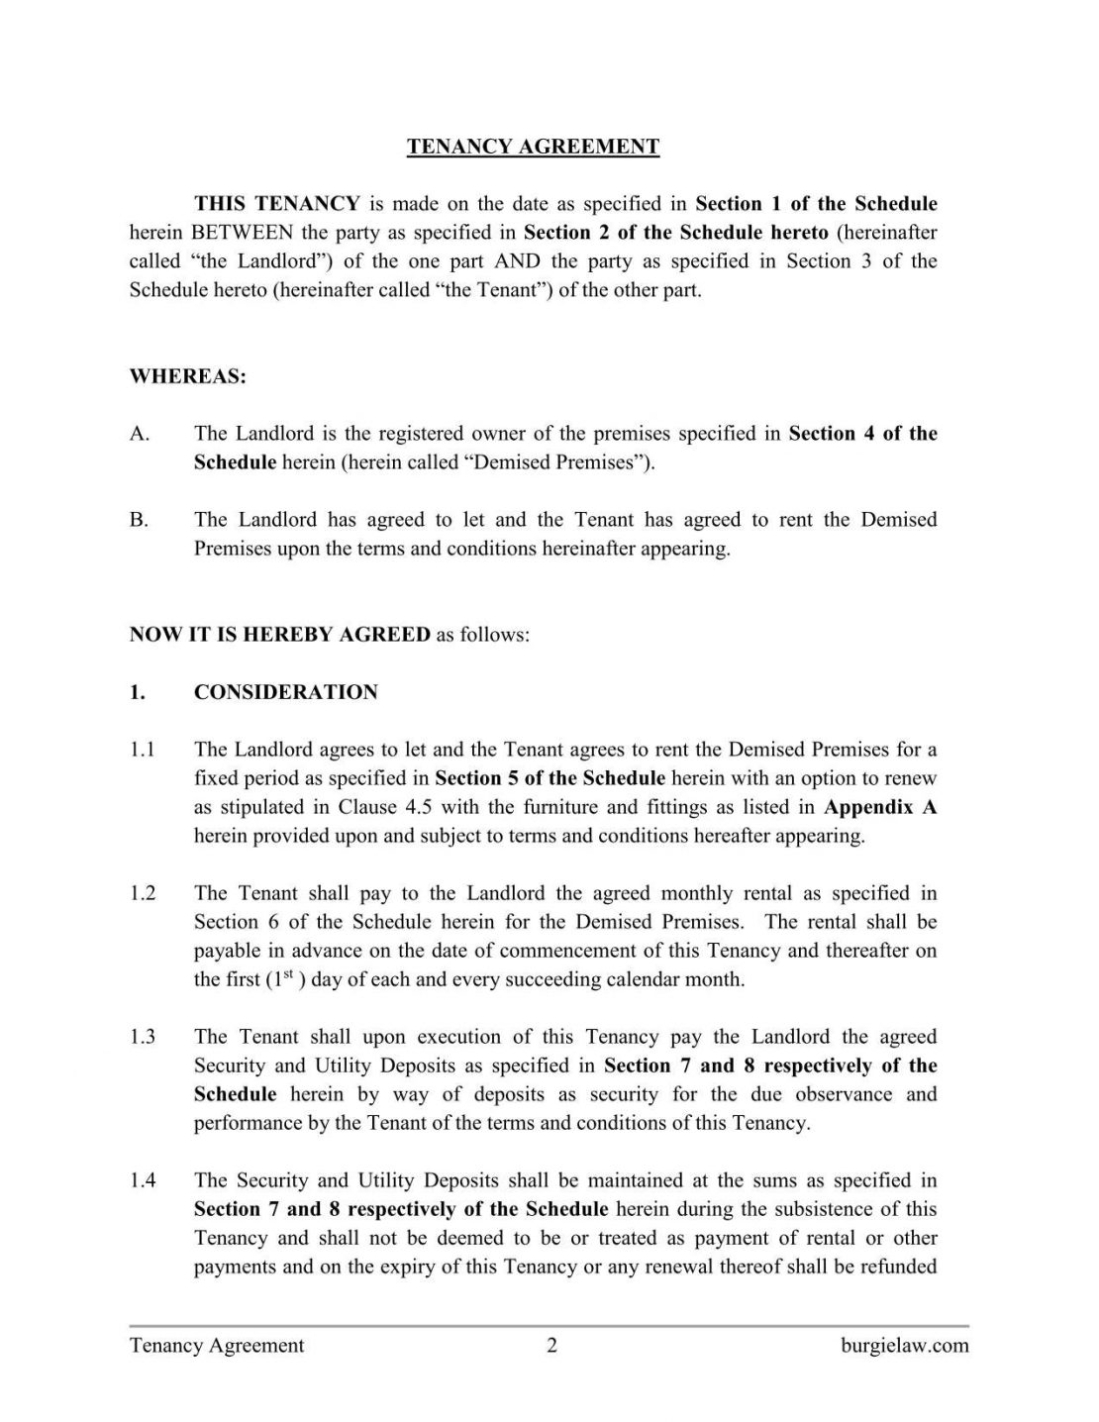 Tenancy Agreement Template - Burgielaw Within Renewal Of Tenancy Agreement Template